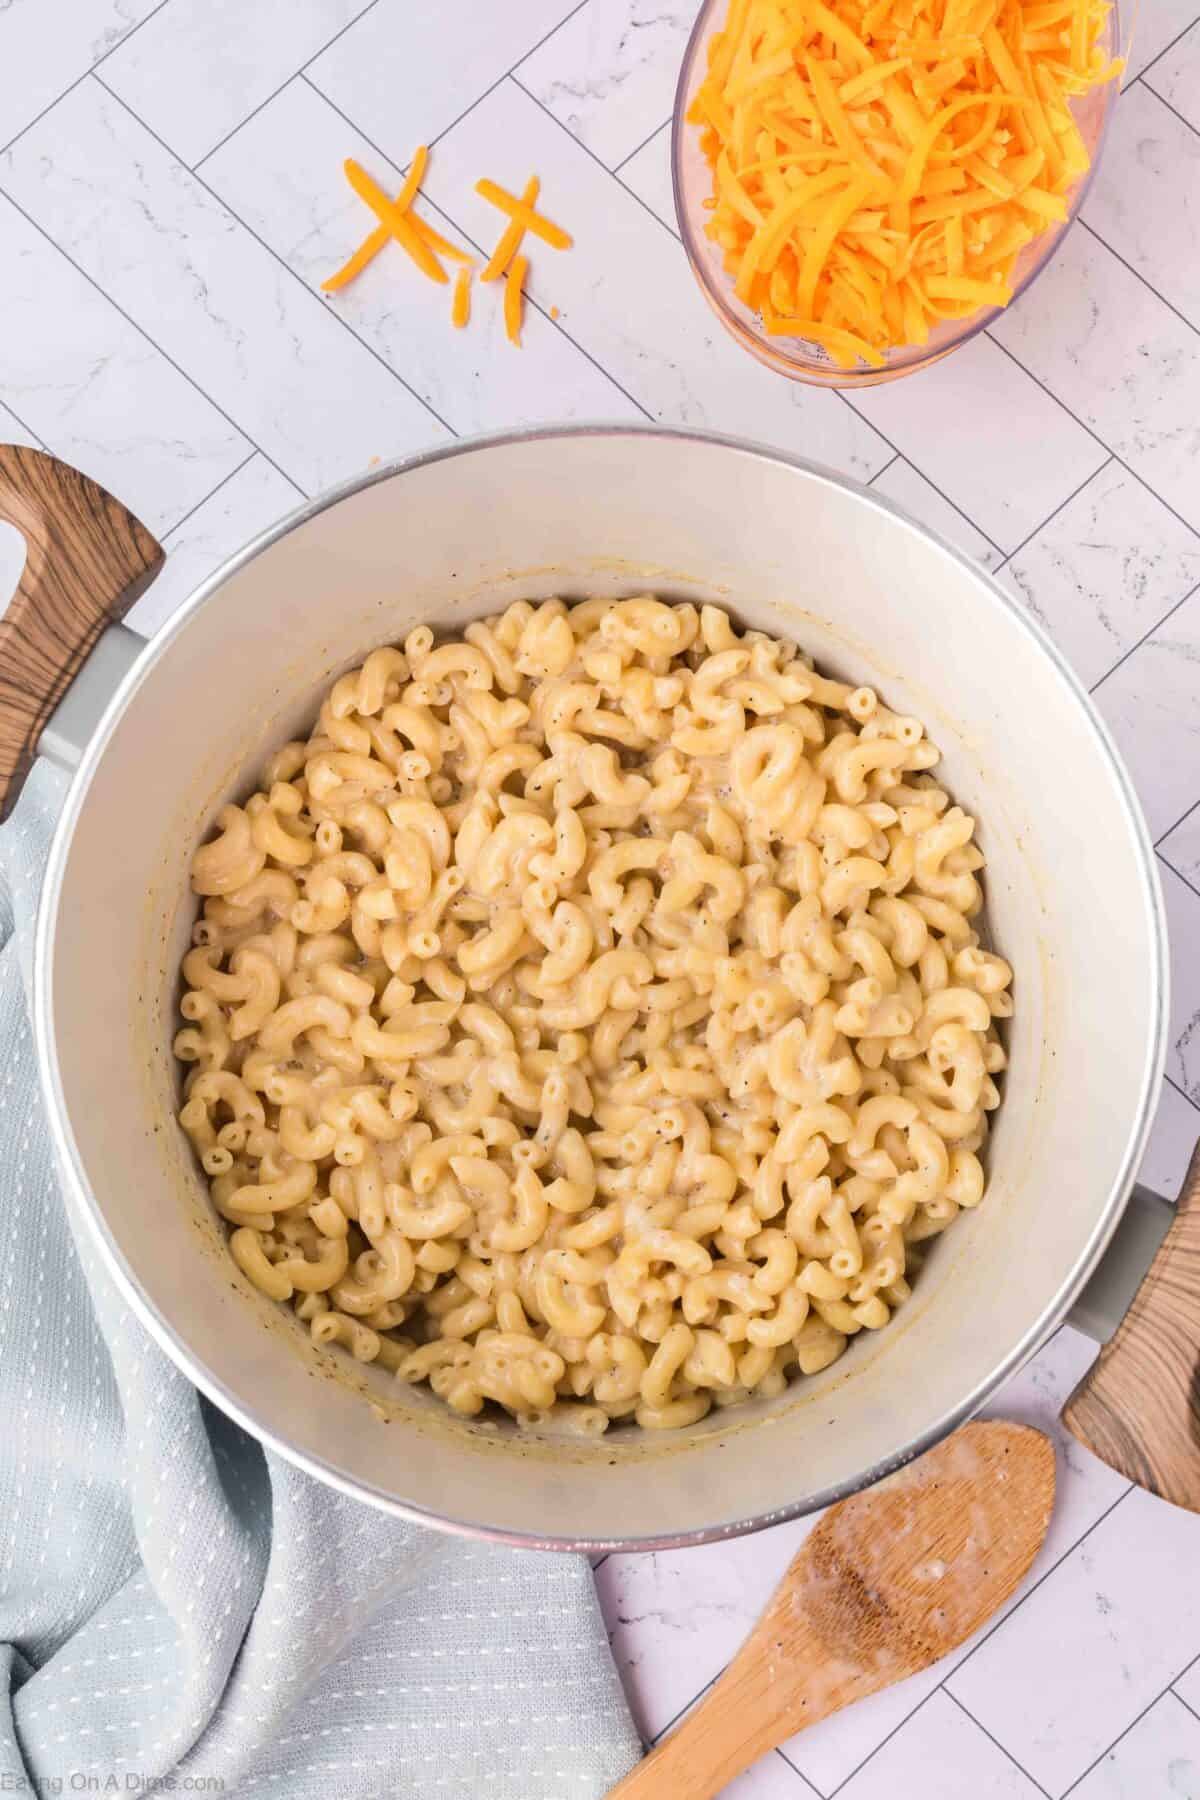 A large pot of creamy macaroni and cheese, showcasing an easy homemade macaroni and cheese recipe, sits on a marble countertop. Next to it is a wooden spoon resting on a light blue cloth and a bowl filled with shredded cheddar cheese. A few pieces of cheddar are scattered on the counter.